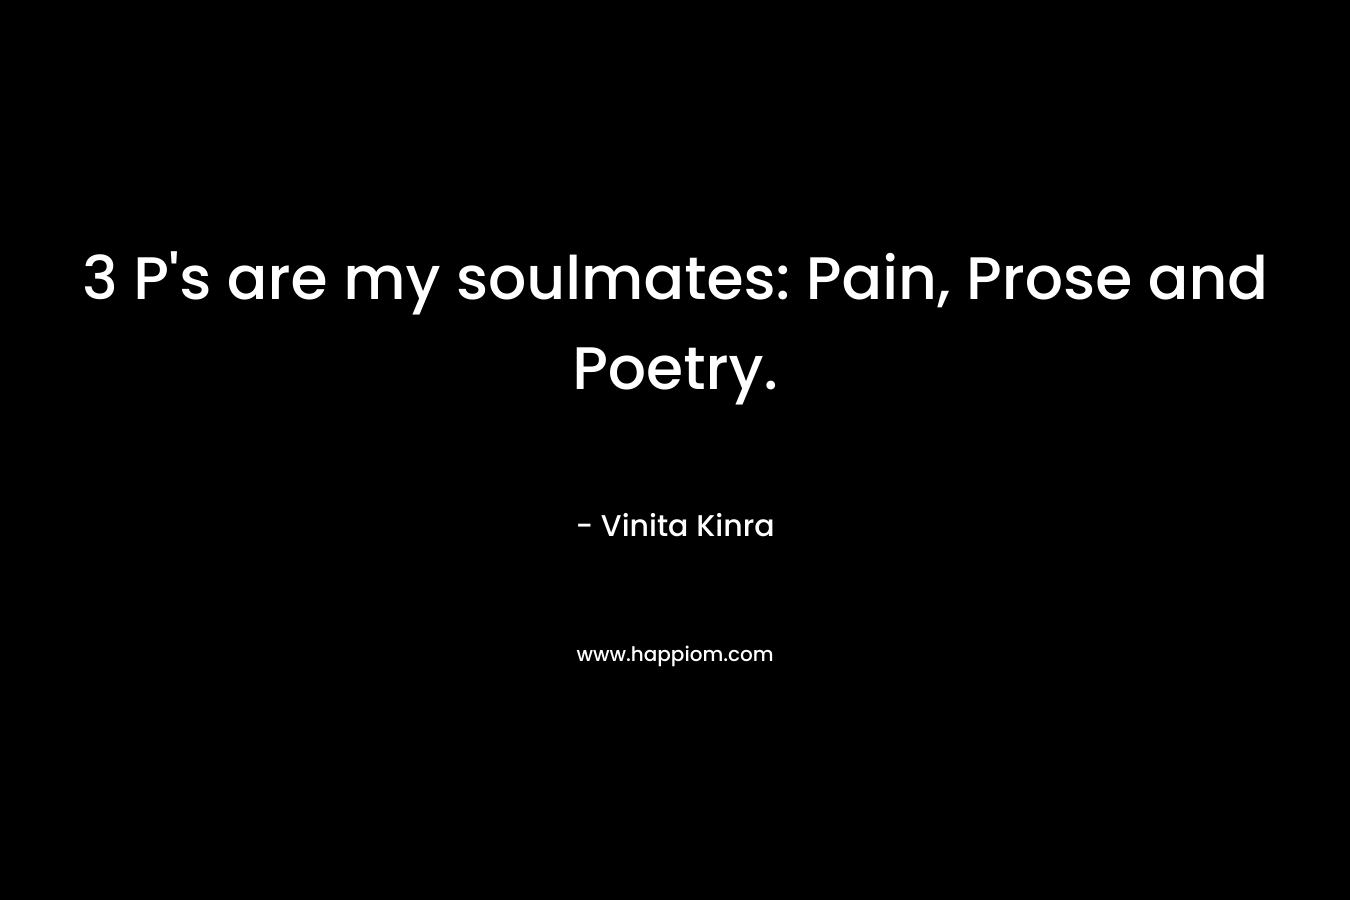 3 P's are my soulmates: Pain, Prose and Poetry.